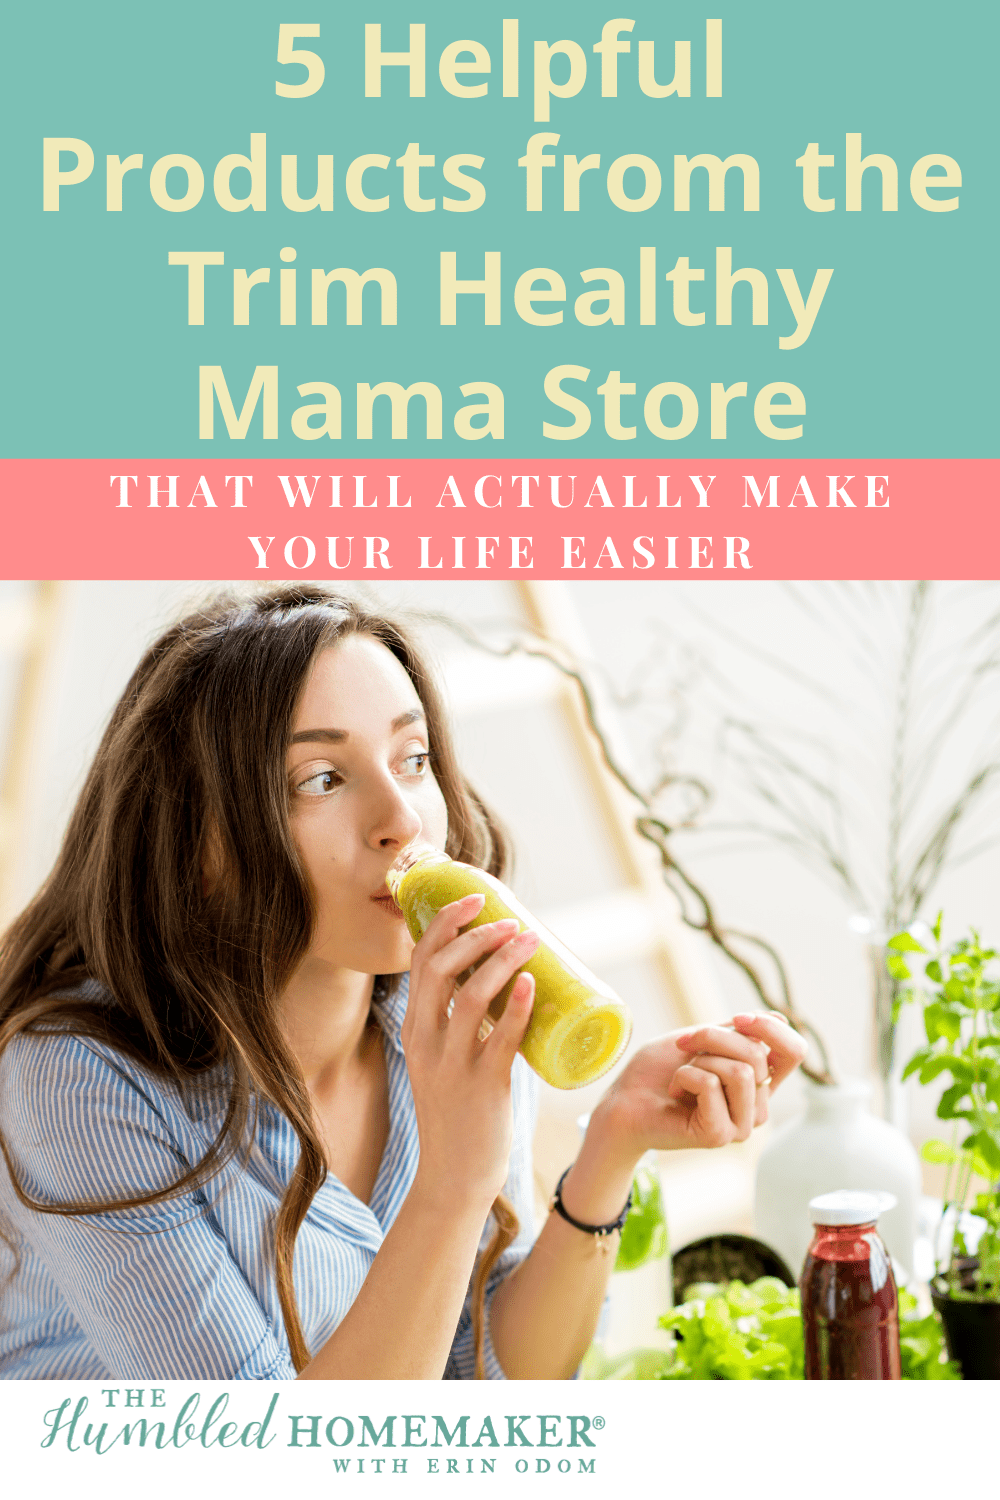 Find out which Trim Healthy Mama products to buy from their store when you cannot buy them all. These are the products that are the most helpful and will actually make your life easier! 